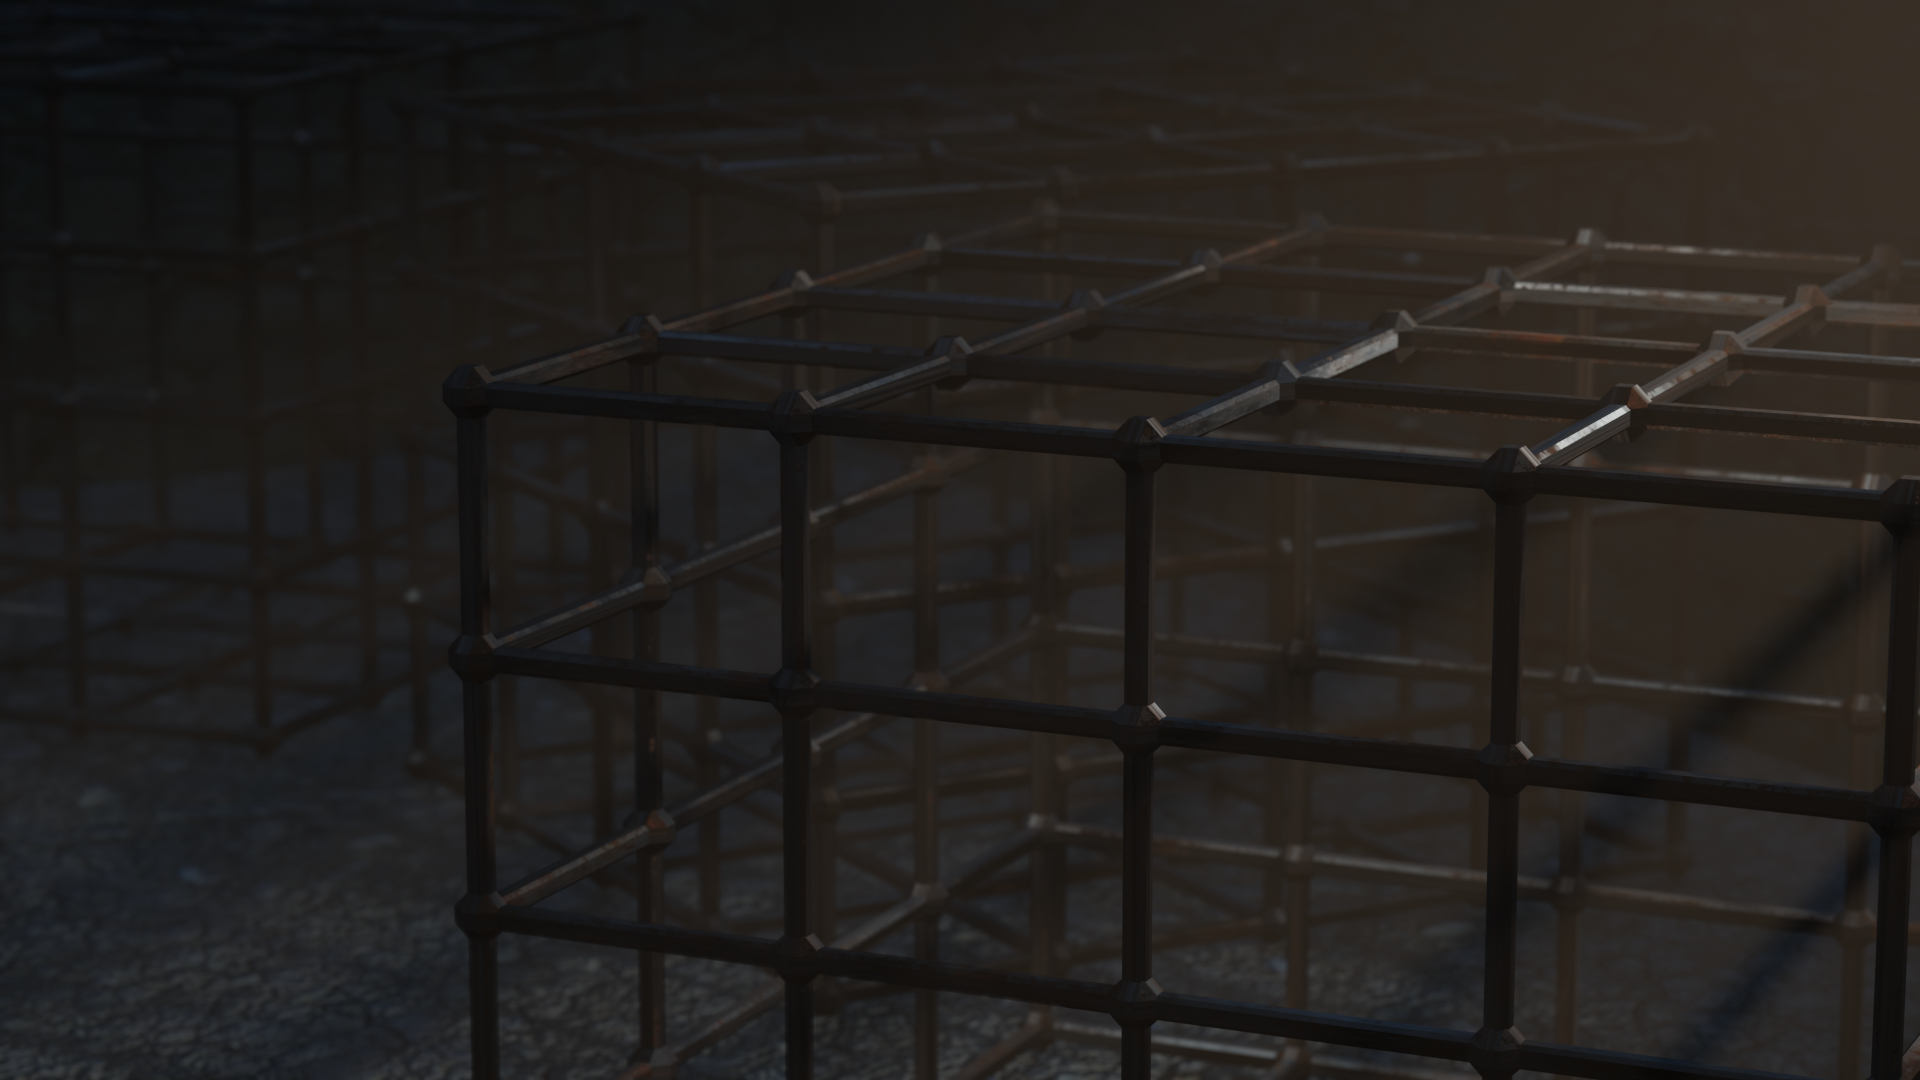 A render of three rusty old cages on a stone floor